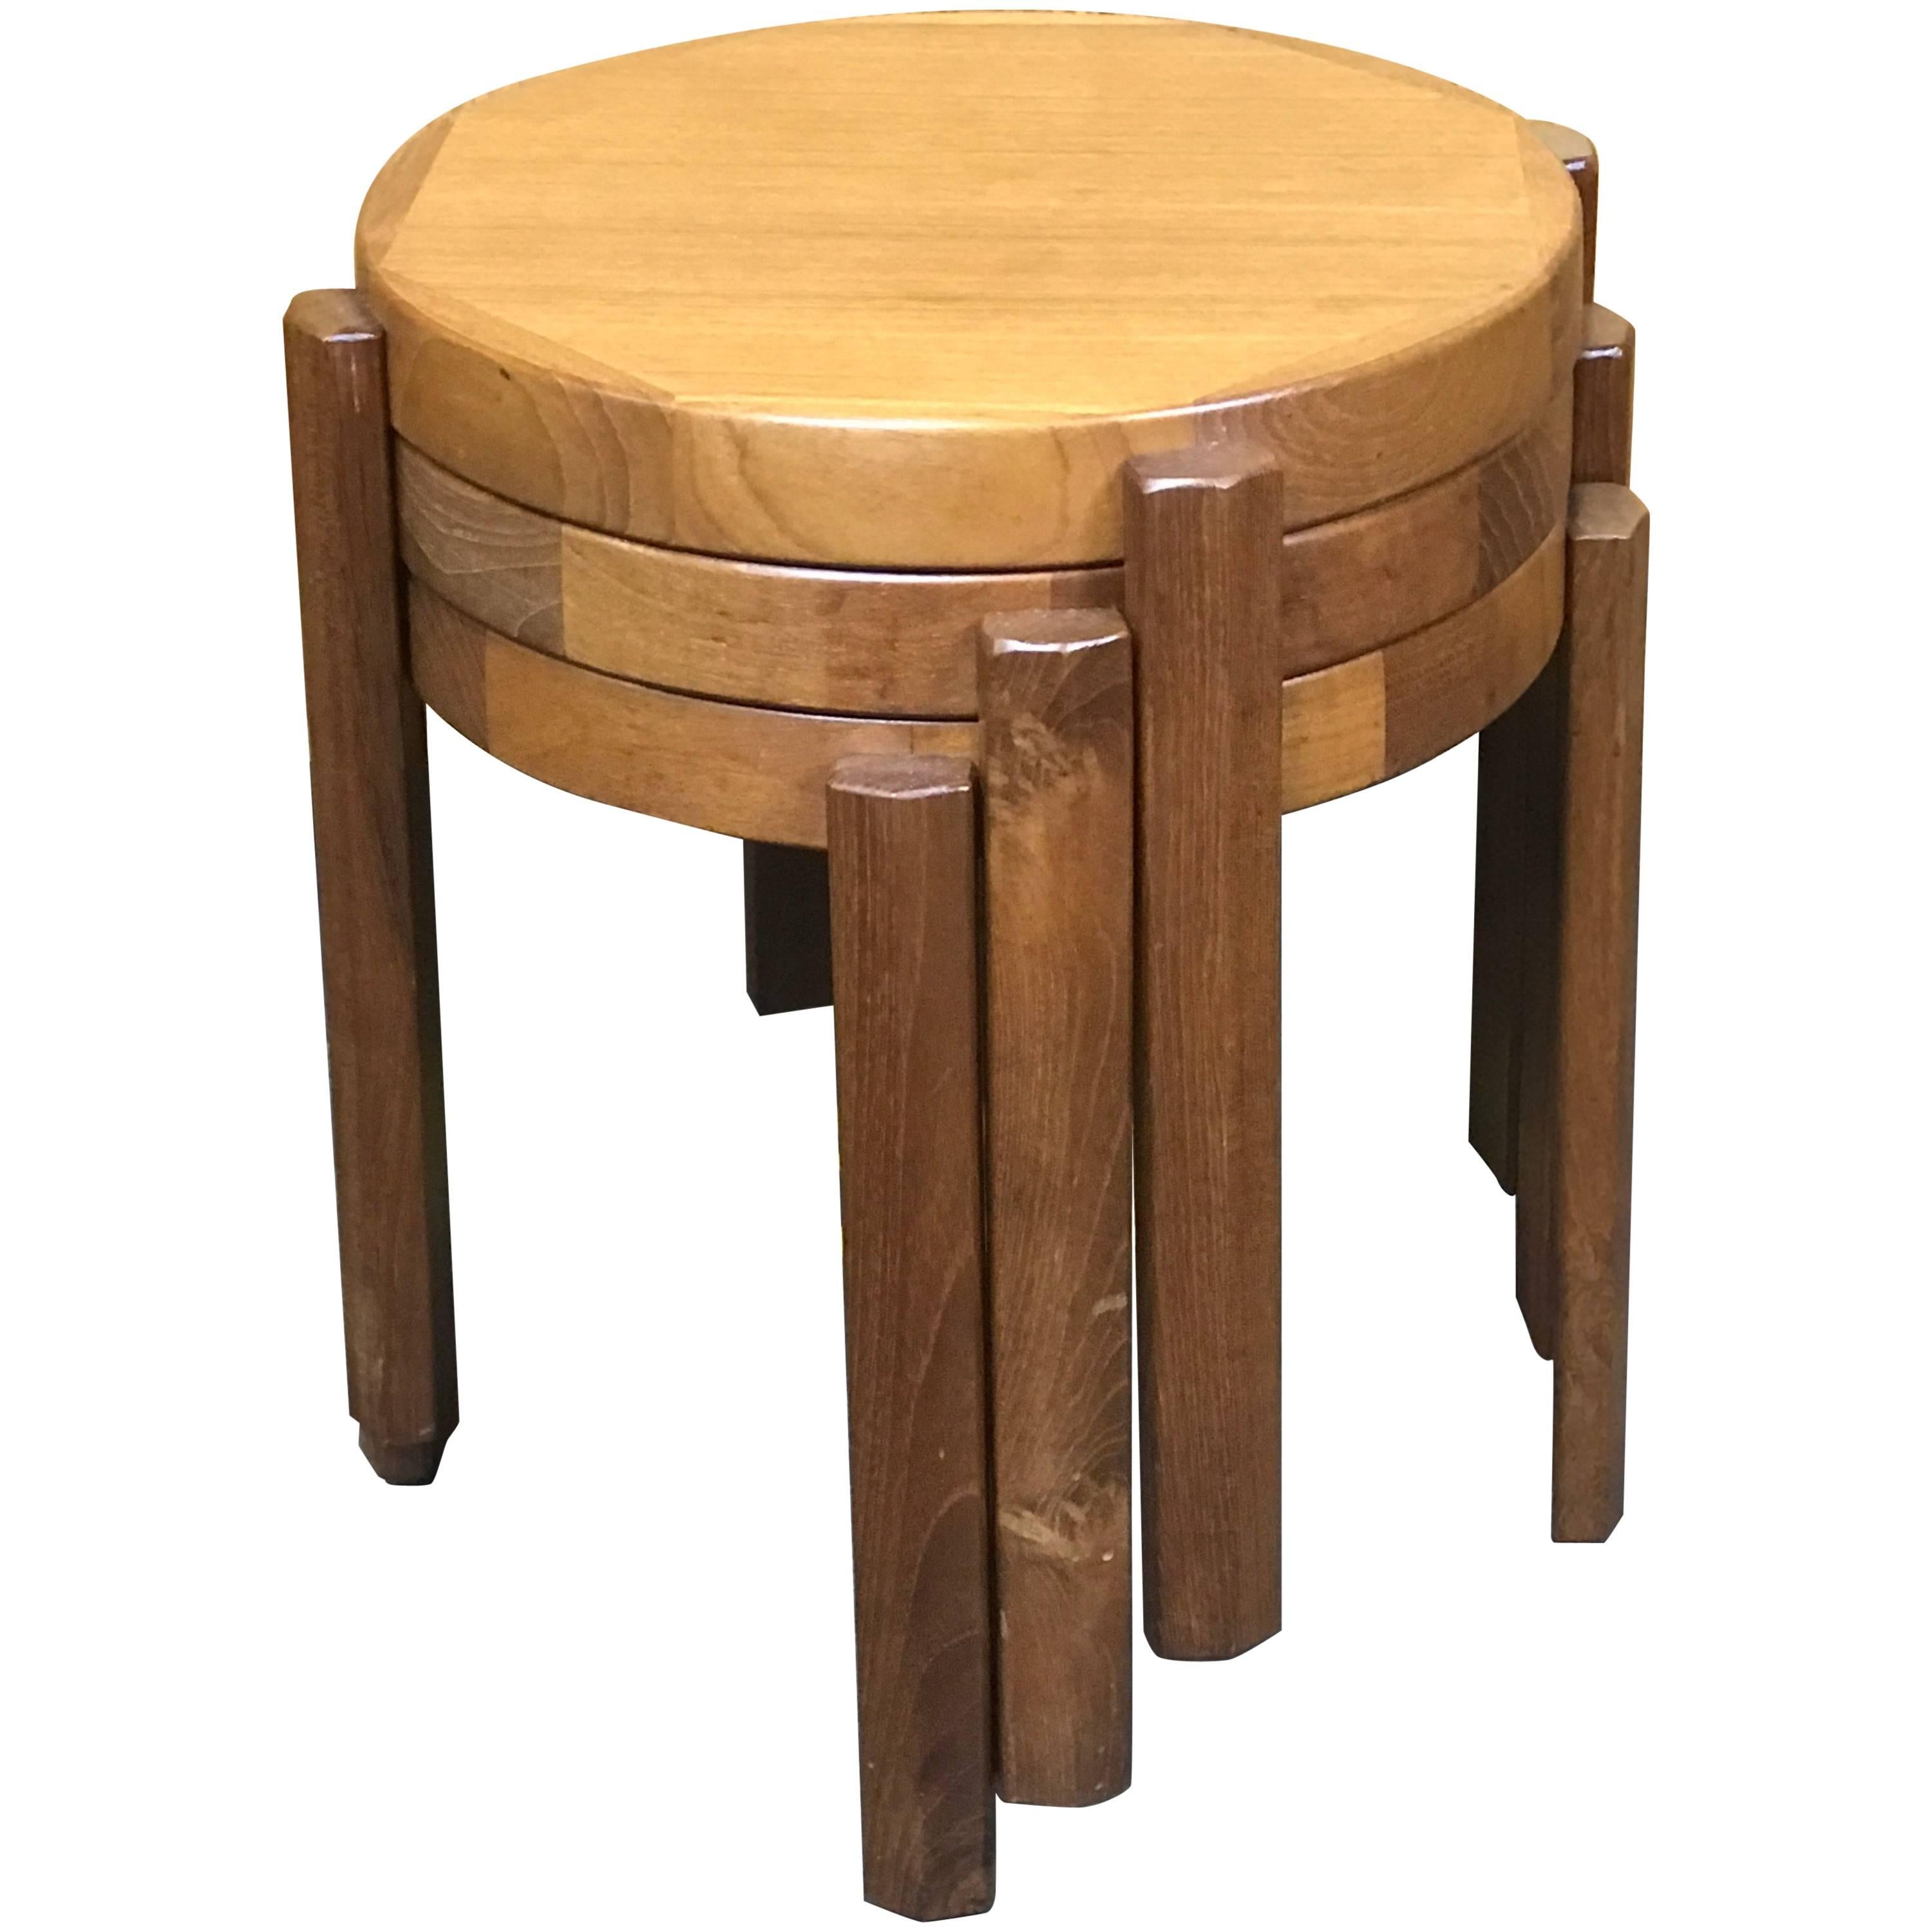 Great Set of Chunky Danish Modern Stacking Circular Tables or Stools